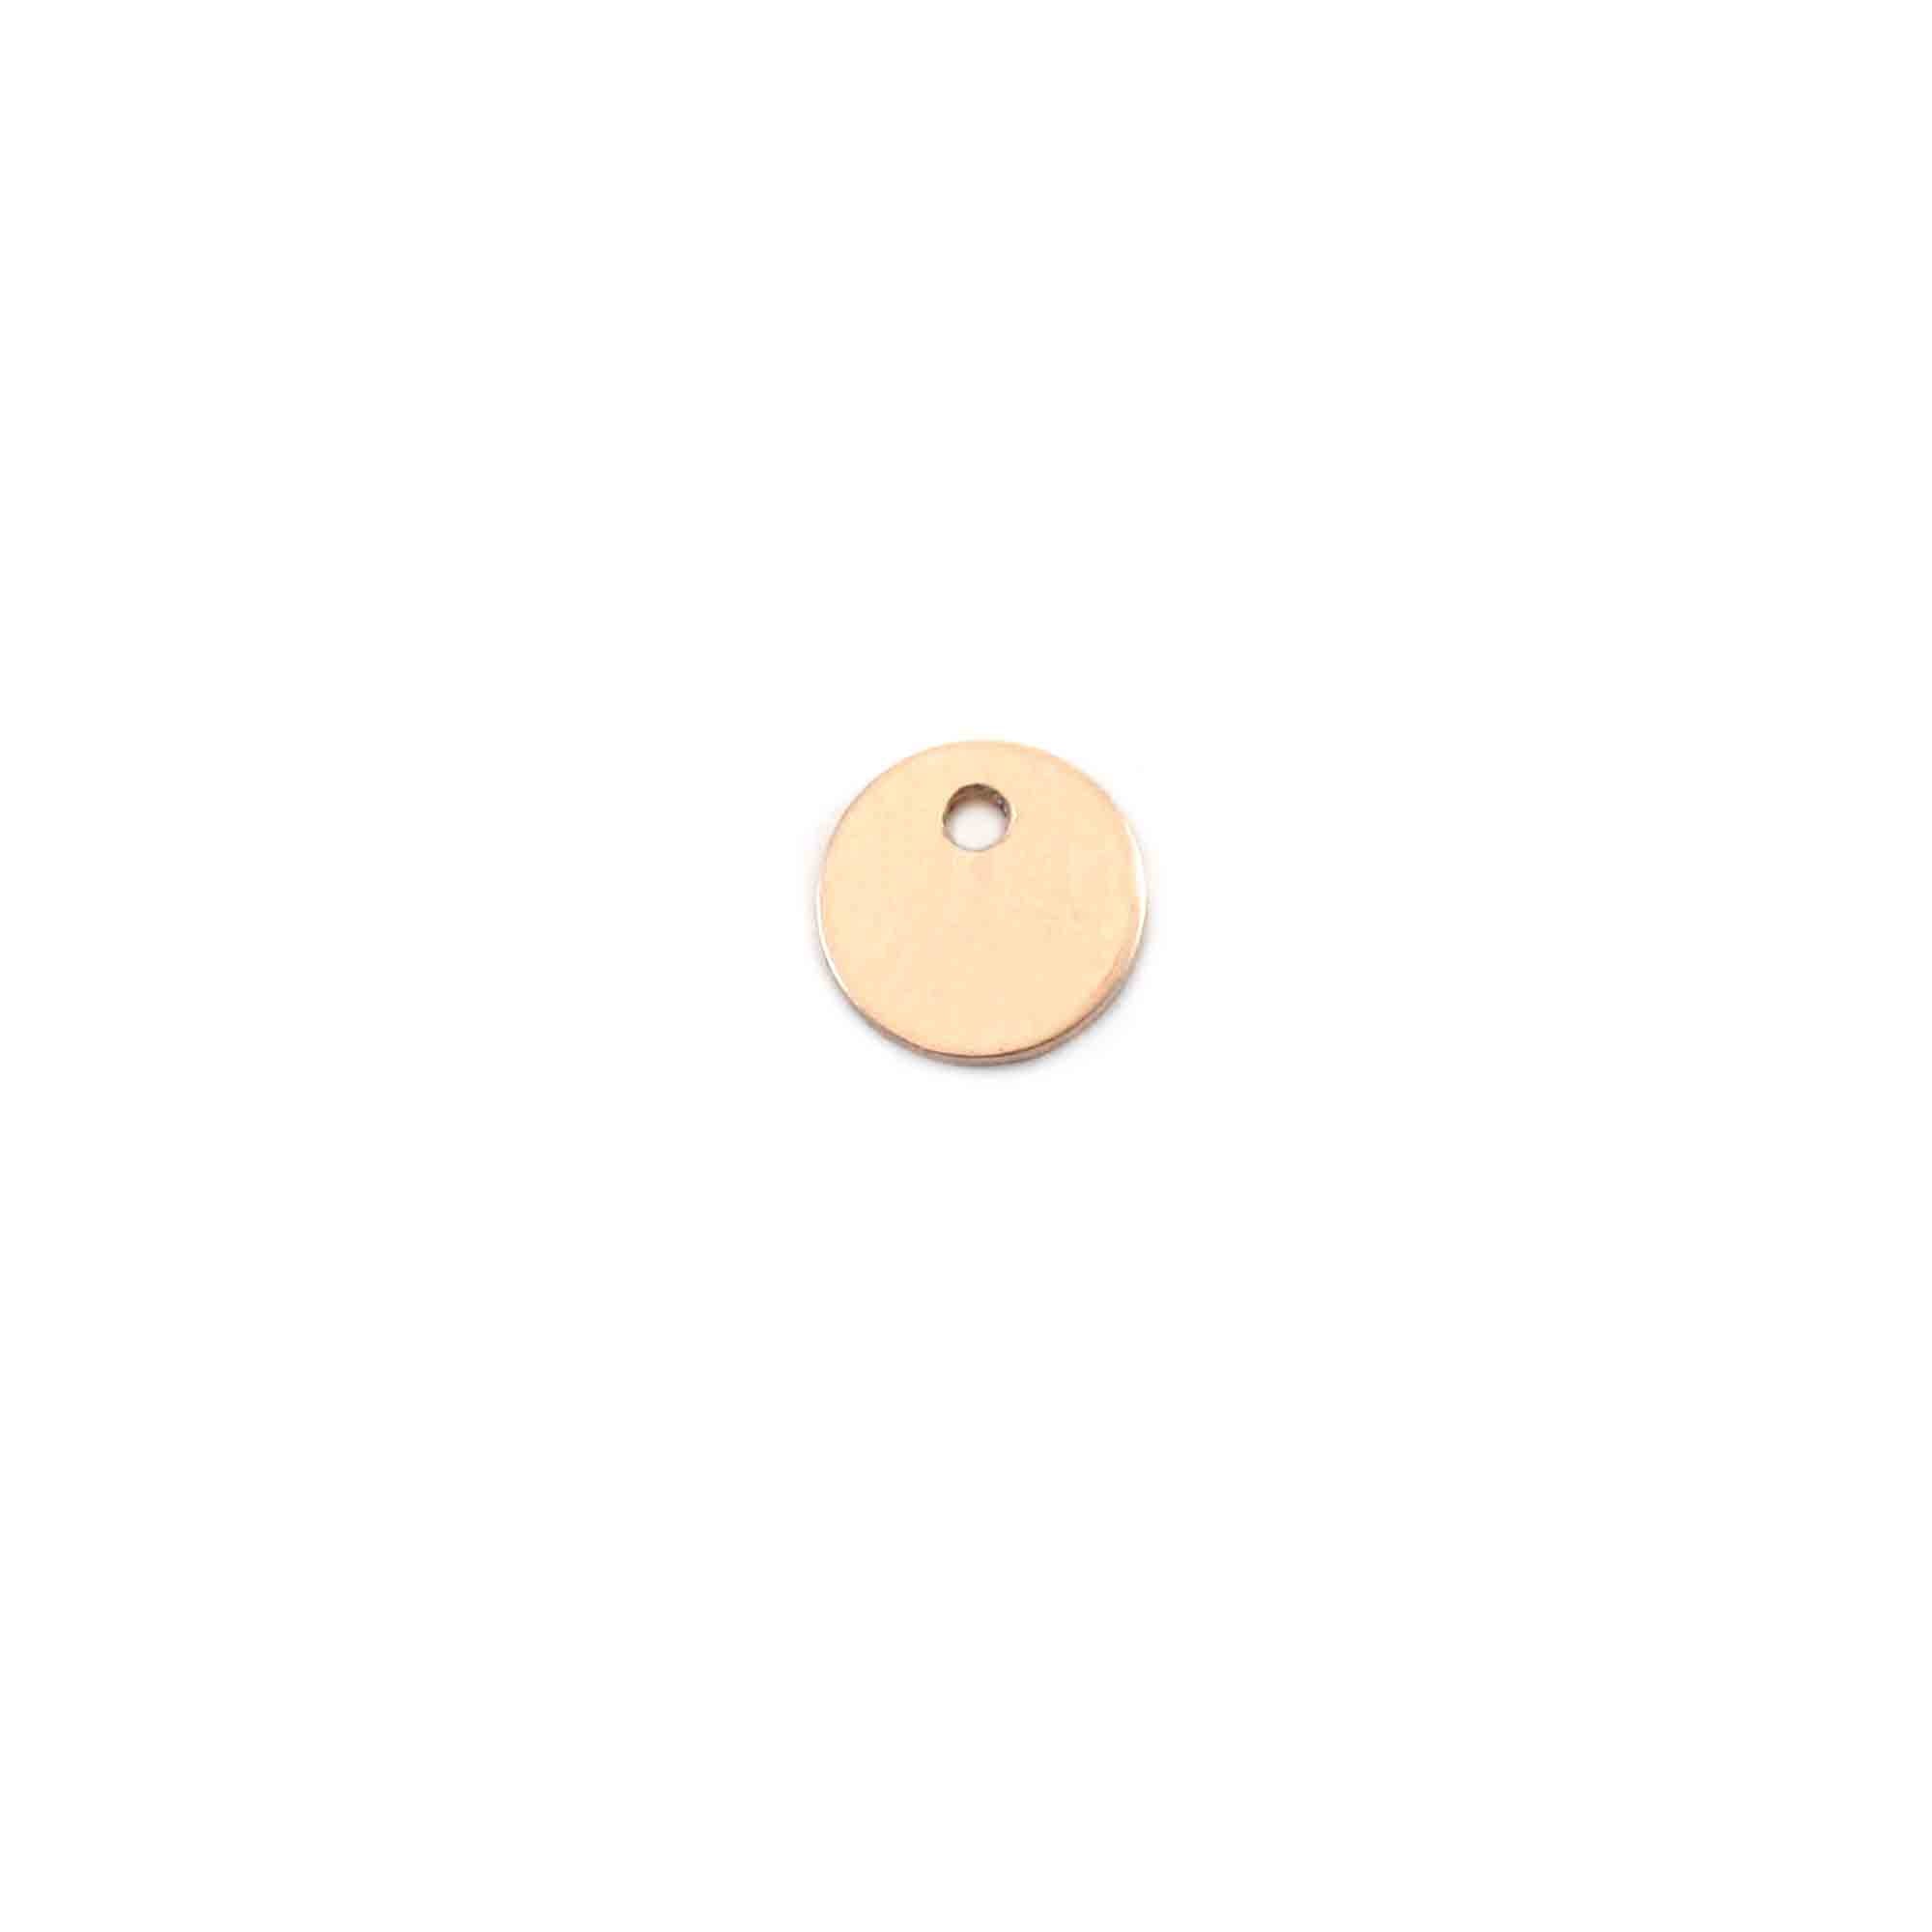 4mm Gold-Filled Round Disc Charm with Hole